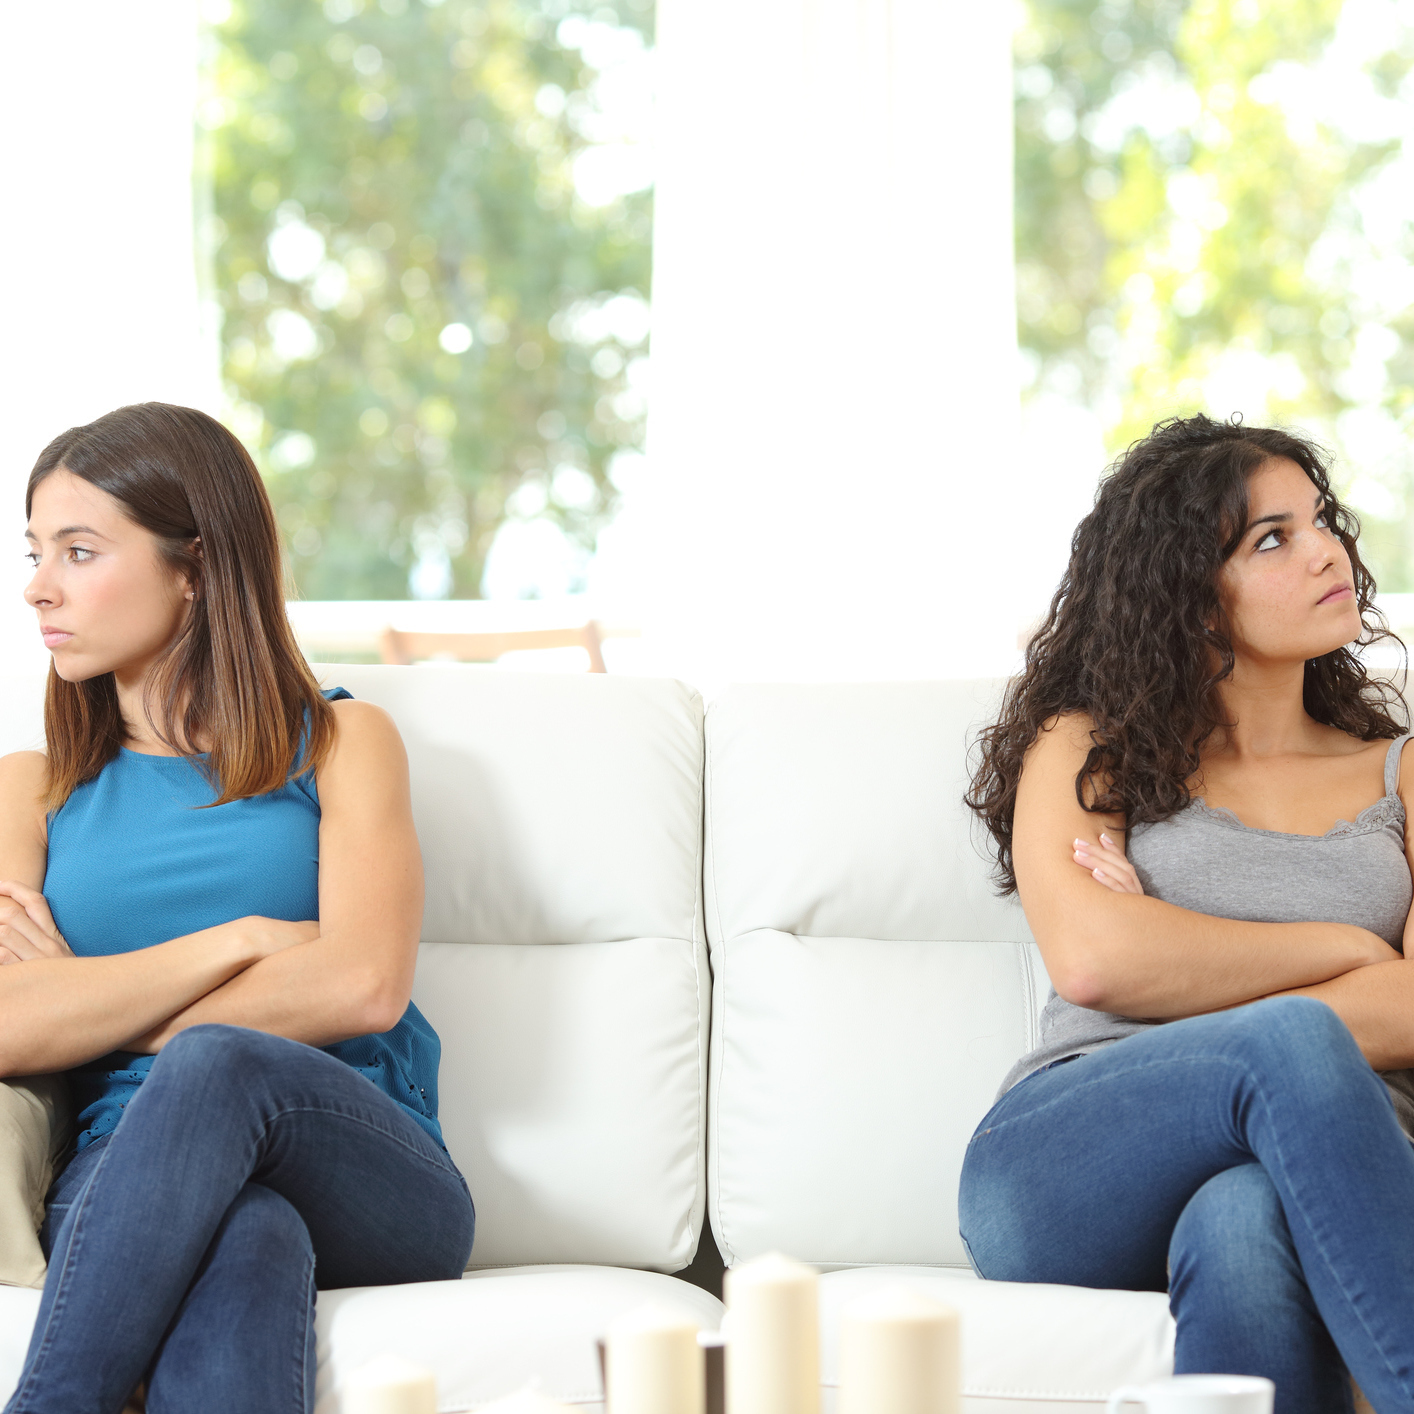 two friends sitting on opposite ends of the couch with arms crossed looking away from each other